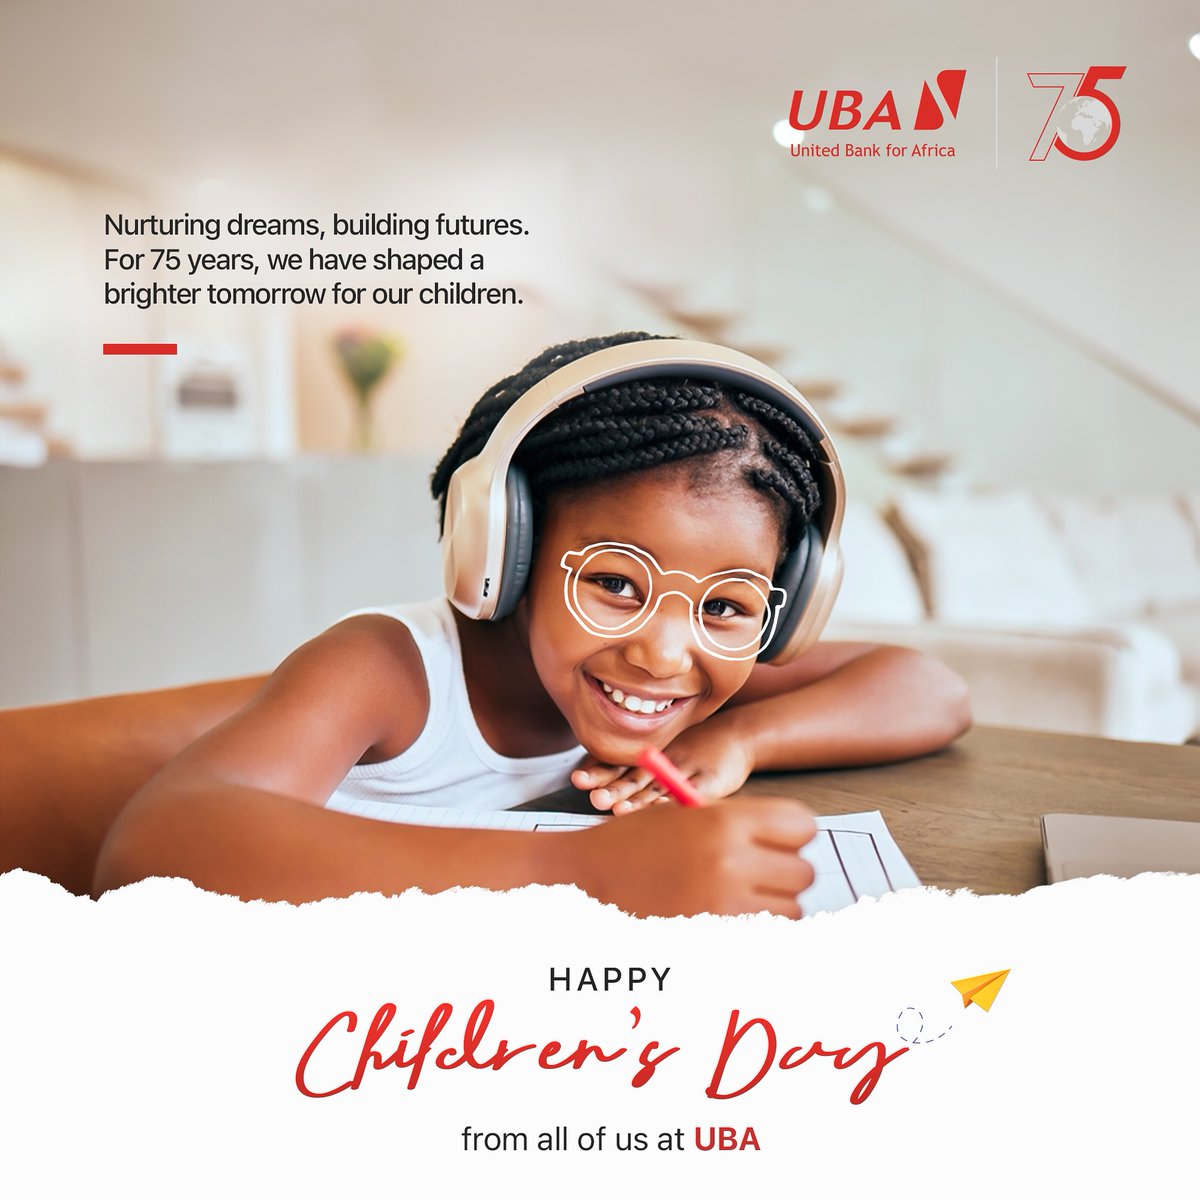 Happy Children’s Day! At UBA, we recognize children as the future and are dedicated to nurturing their growth. On this special occasion, we extend warm wishes to all the young ones worldwide. As part of our commitment, we invite you to open a U-care saving account for your child,